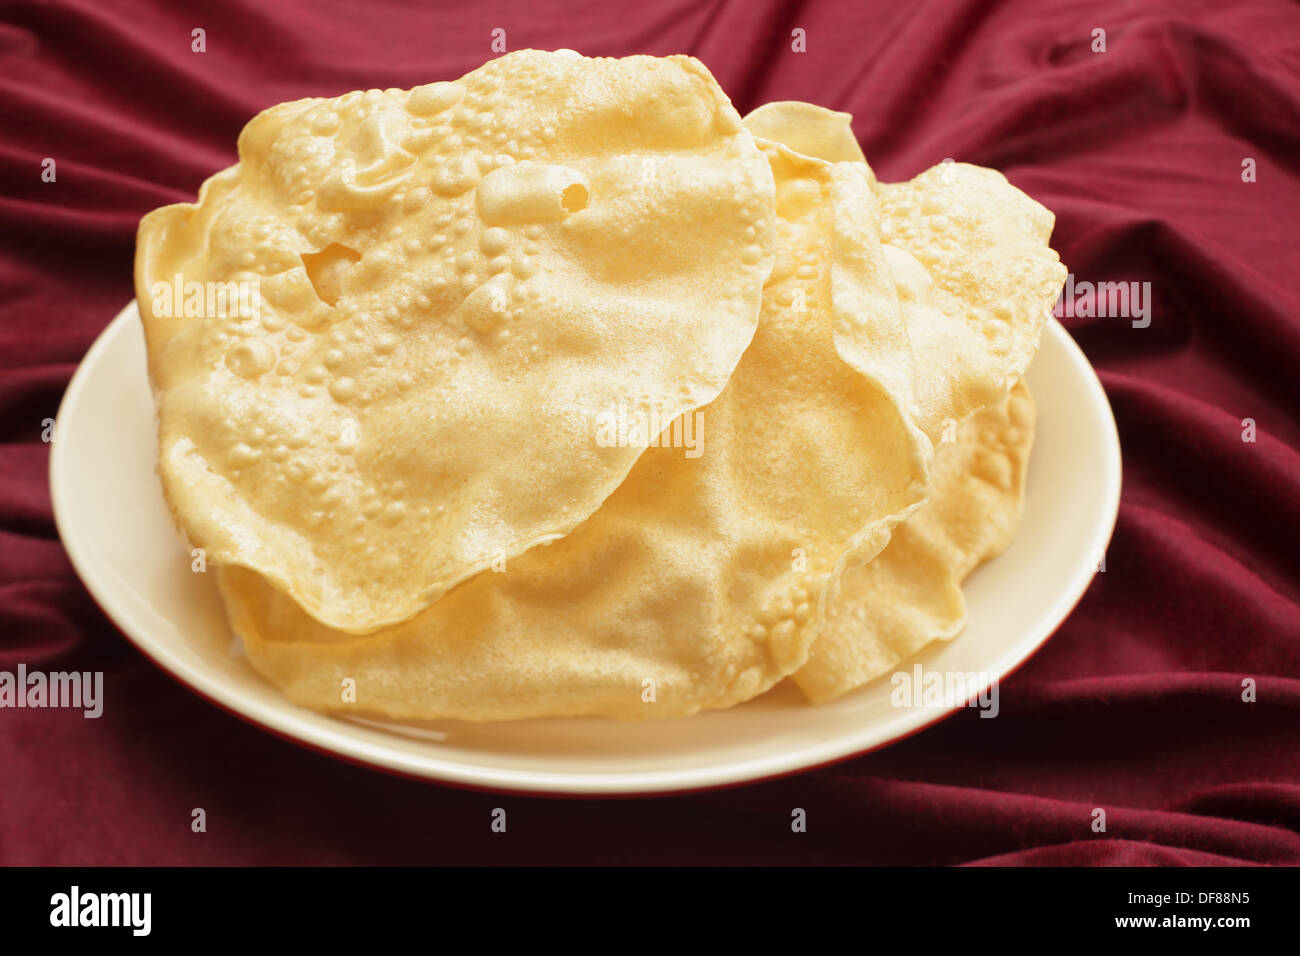 A pile of poppadoms on a plate resting on a red cloth. Stock Photo